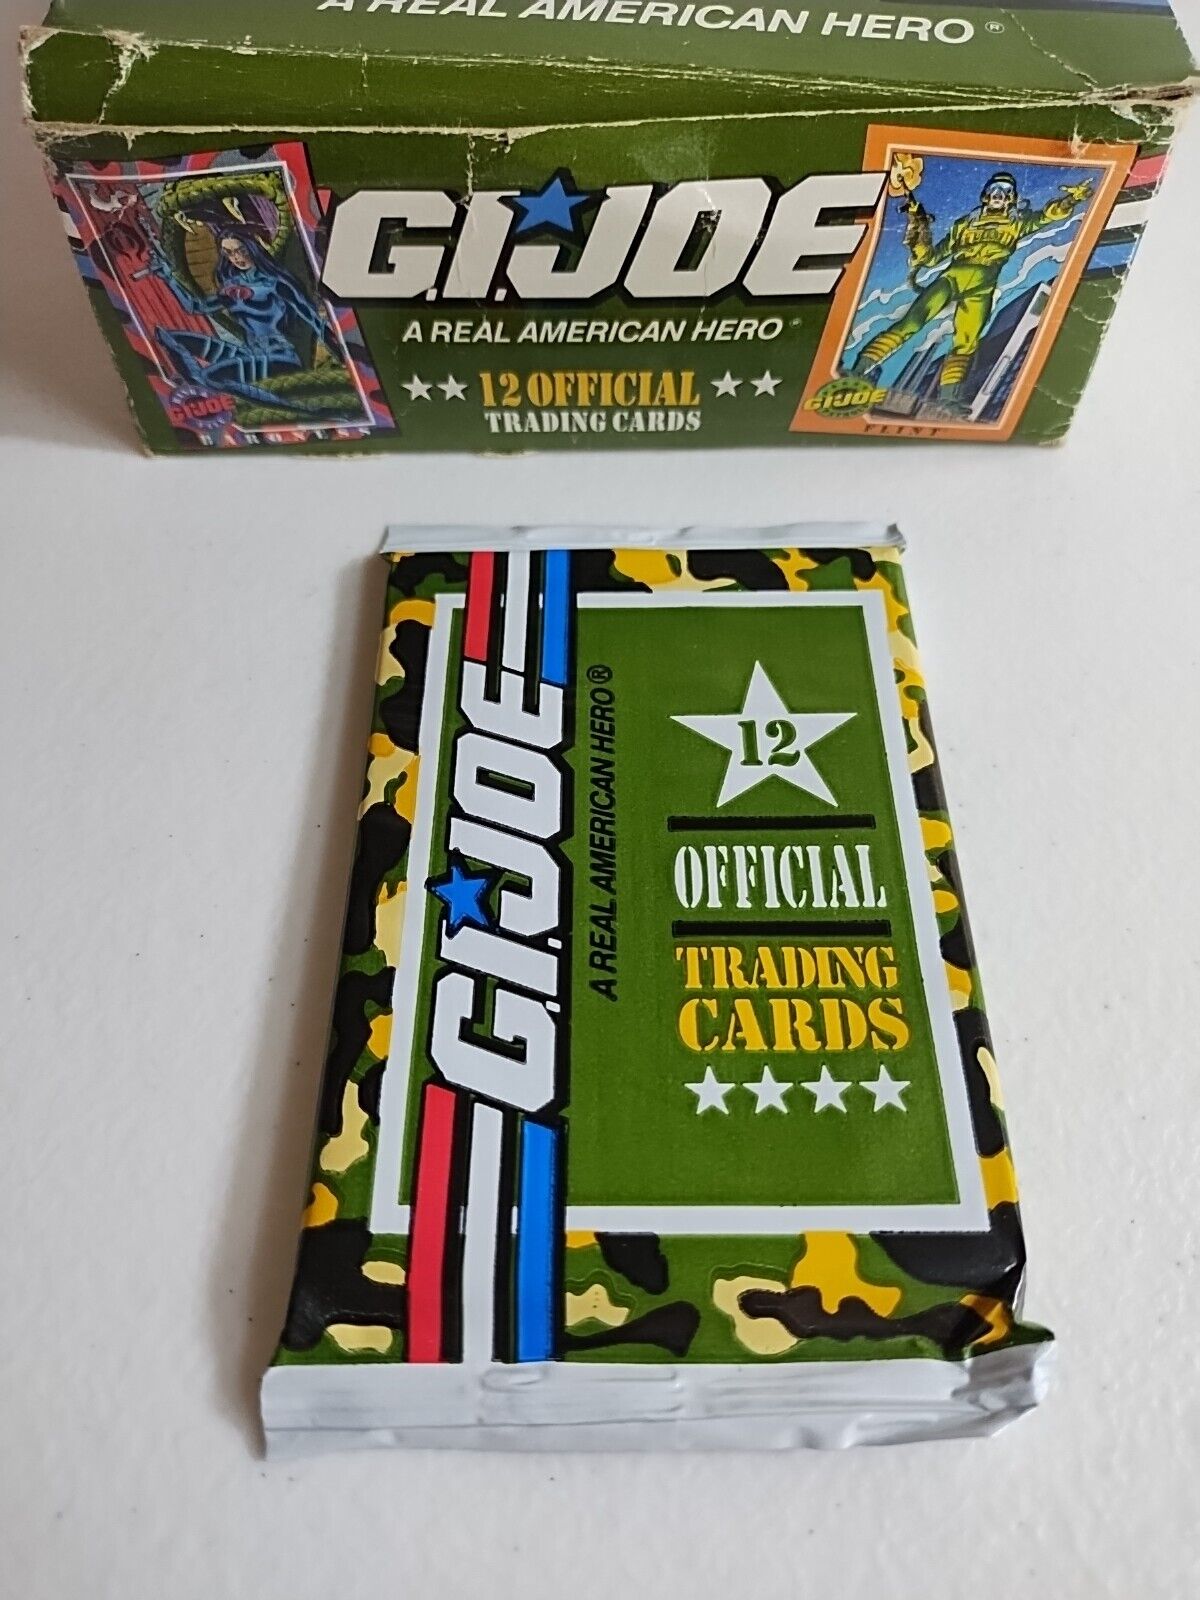 Vintage 1991 Hasbro GI Joe 12 Official Trading Cards 1 New Impel Unopened Pack 